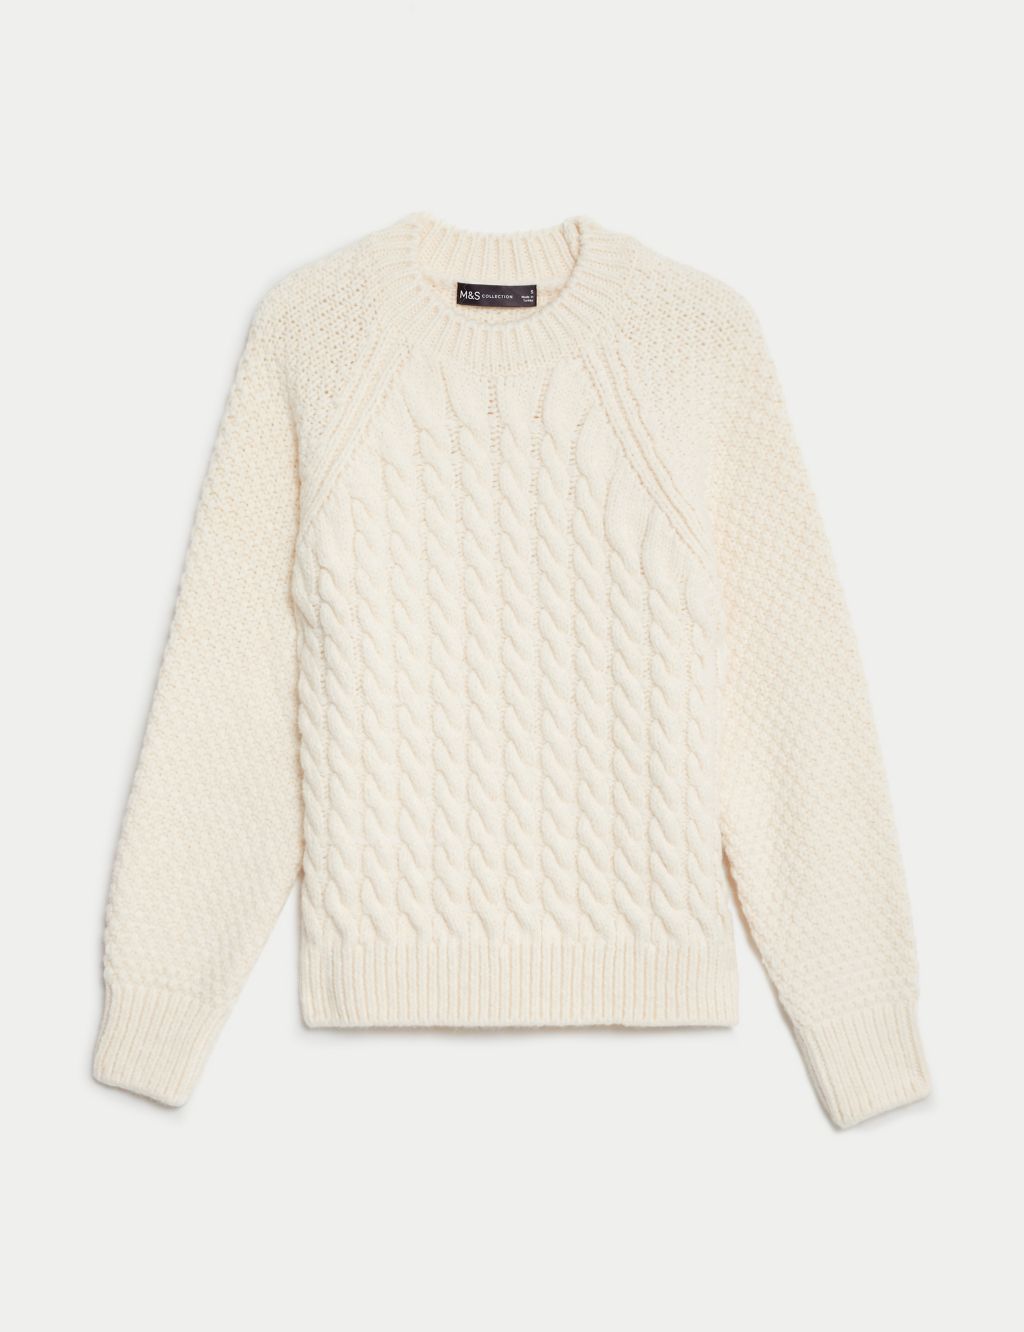 Cable Knit Crew Neck Jumper image 2